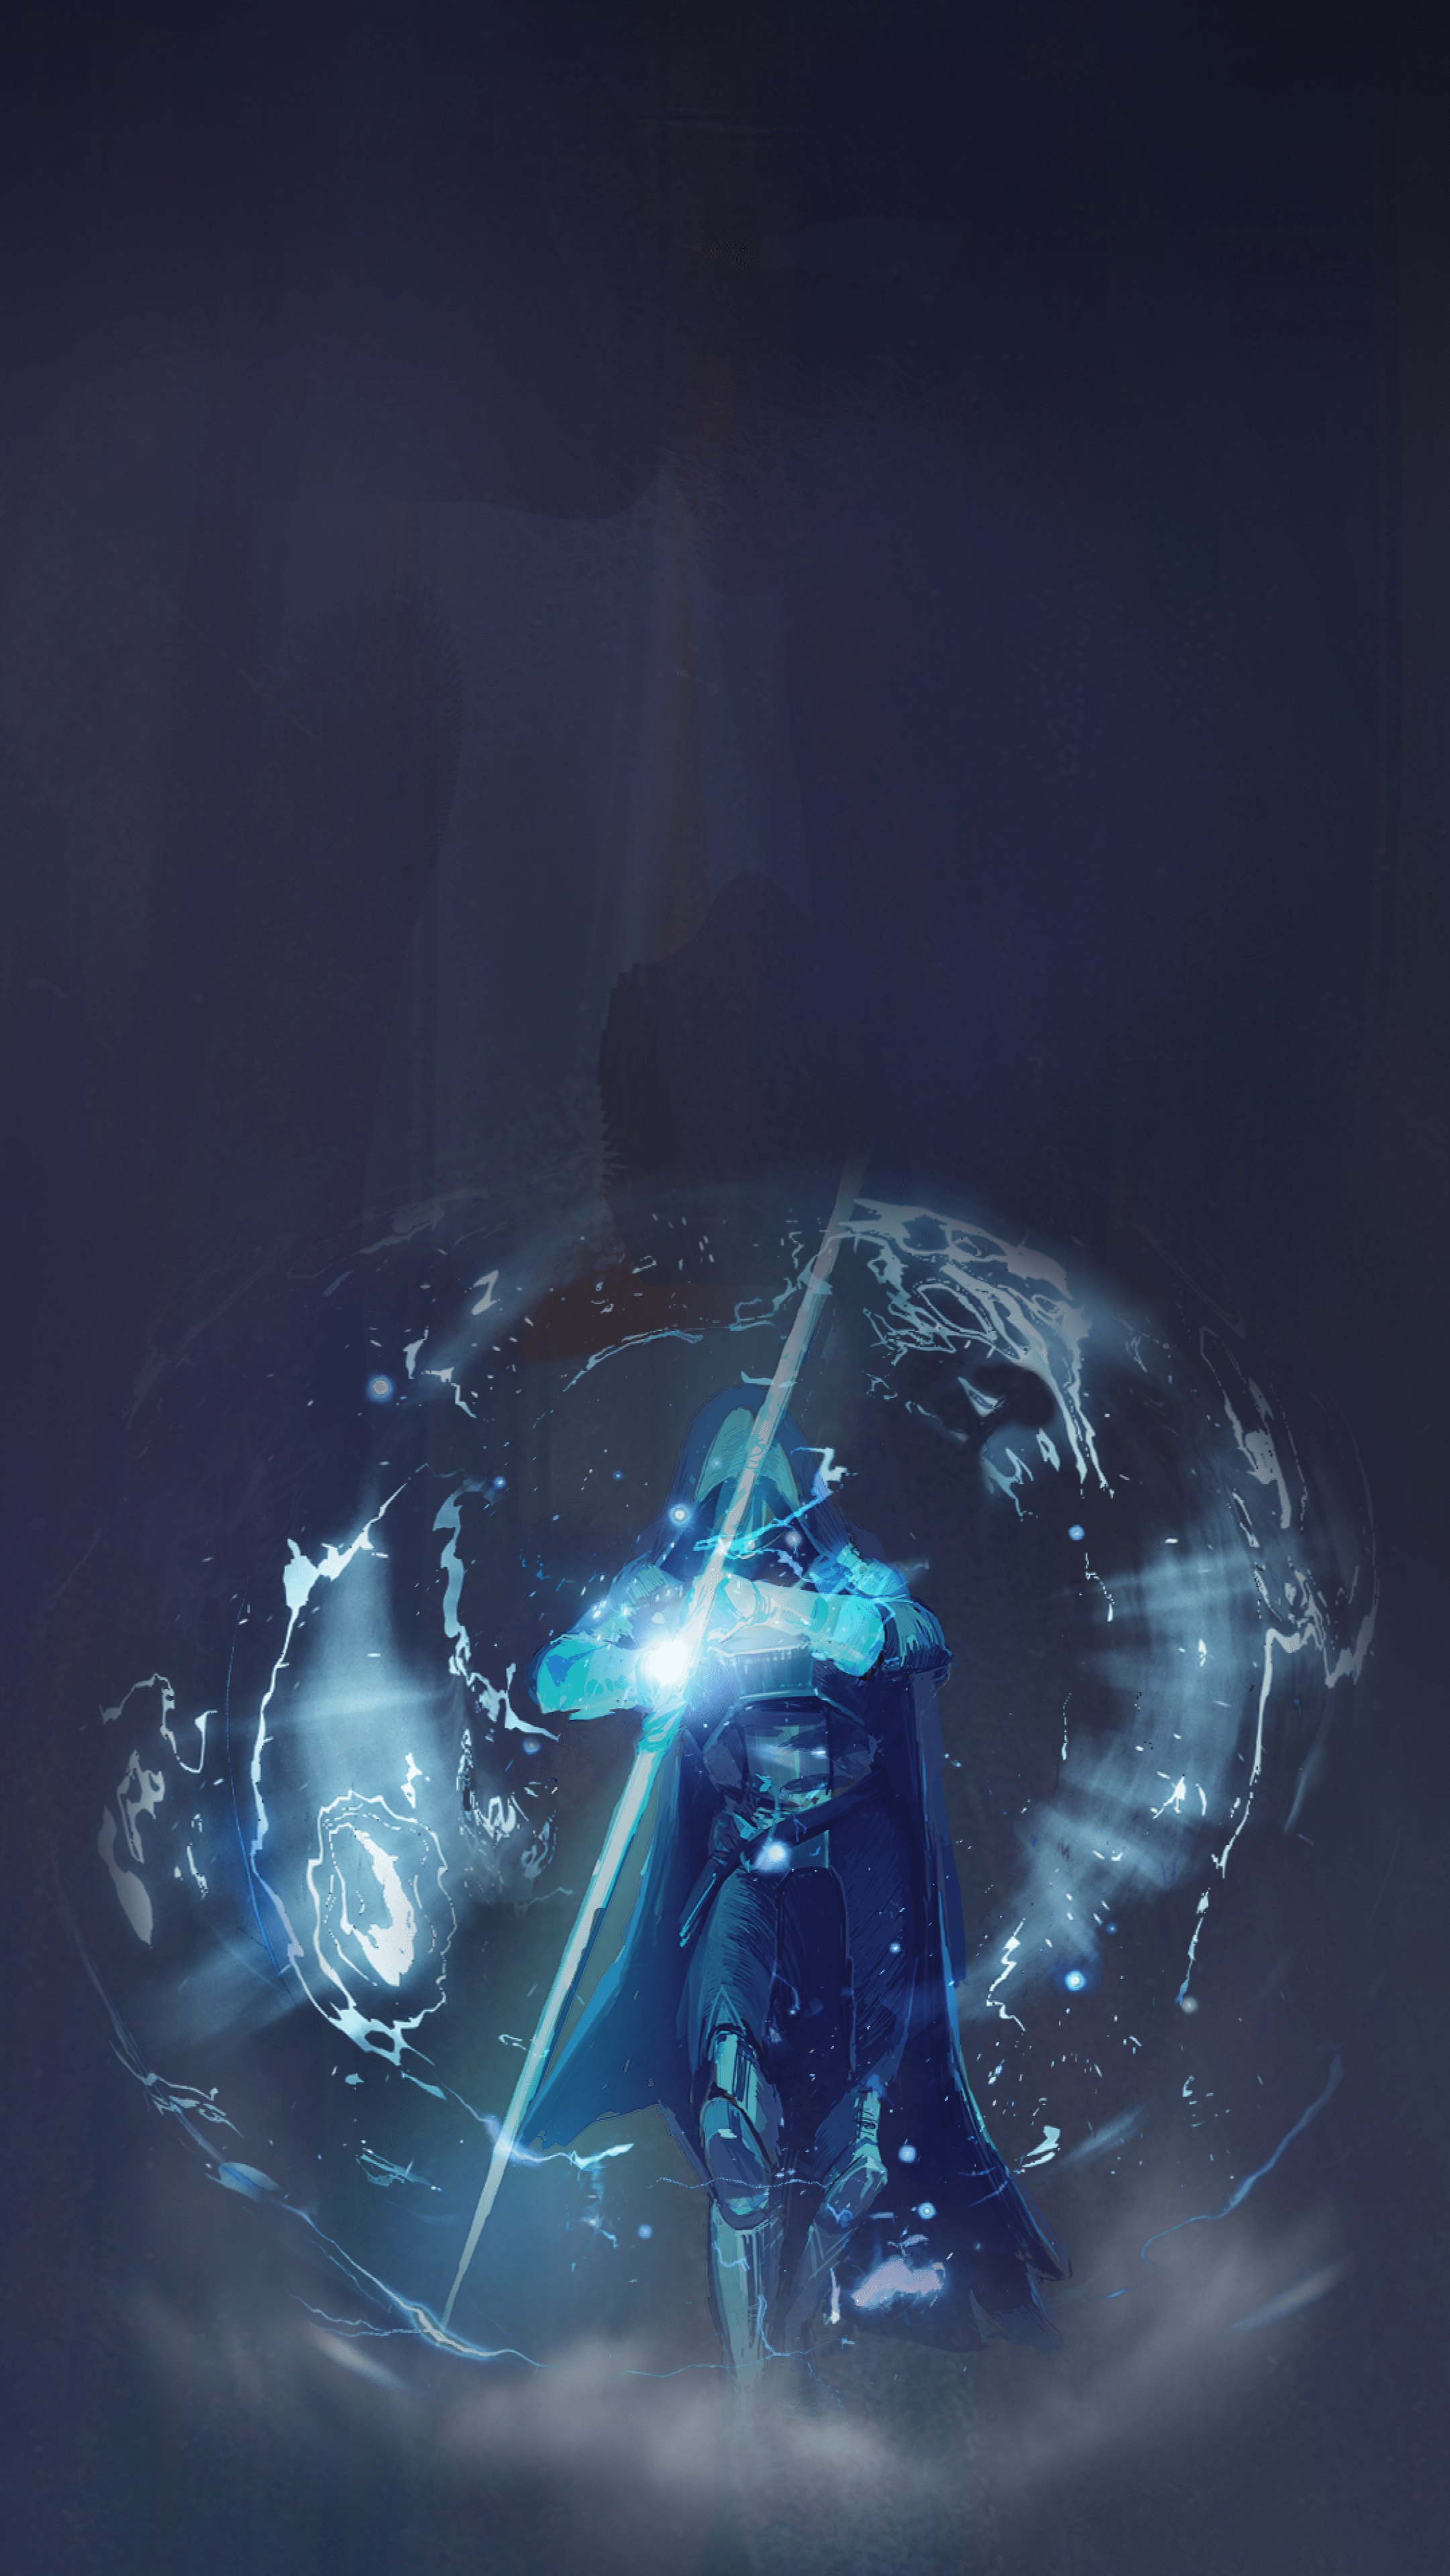 Destiny 2 Iphone Wallpapers Top Free Destiny 2 Iphone Backgrounds Wallpaperaccess